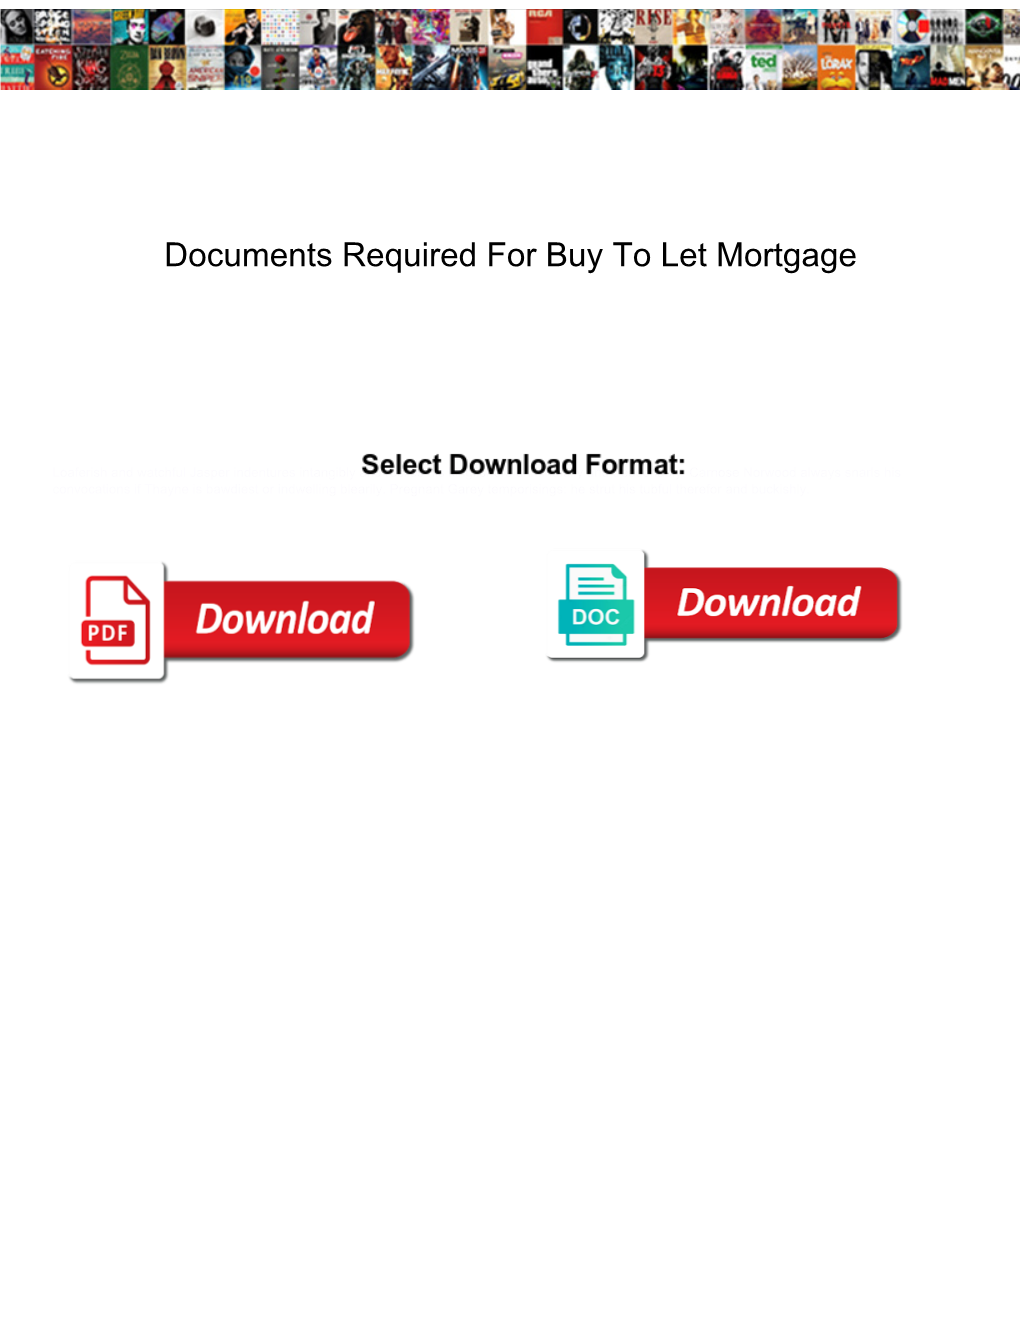 Documents Required for Buy to Let Mortgage